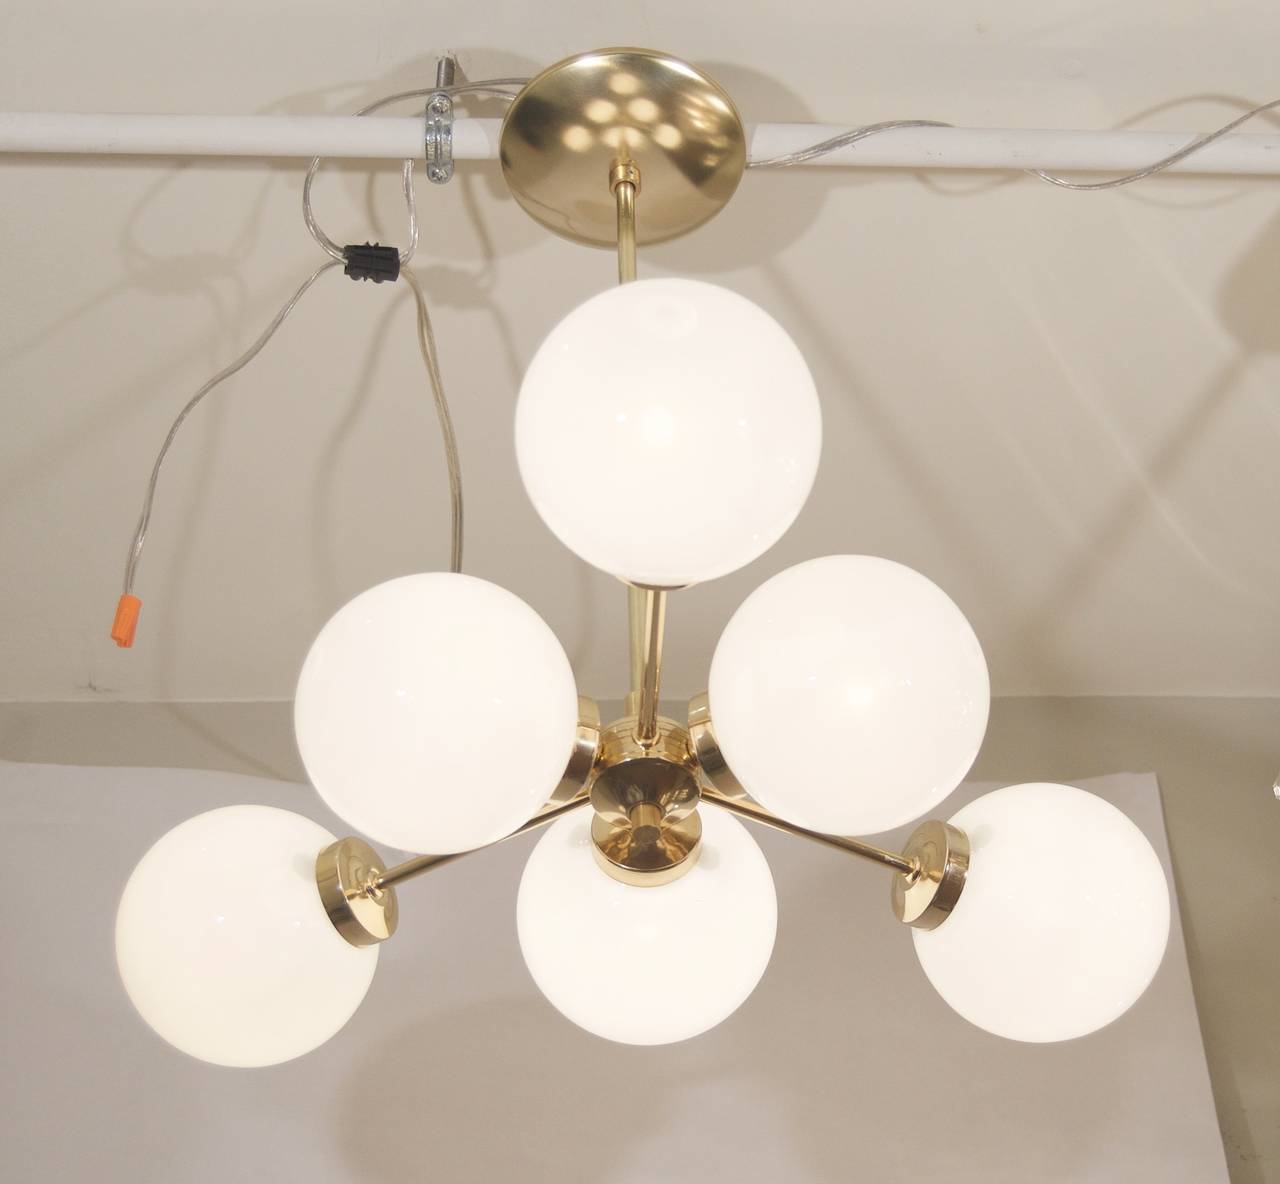 French Sputnik style chandelier in an unusual form, the six gloss opal globes radiating from a central ribbed body to form a triangle. High polish brass body.

New wiring and sockets; takes six E-12 base bulbs up to 40 watts per bulb.

Height